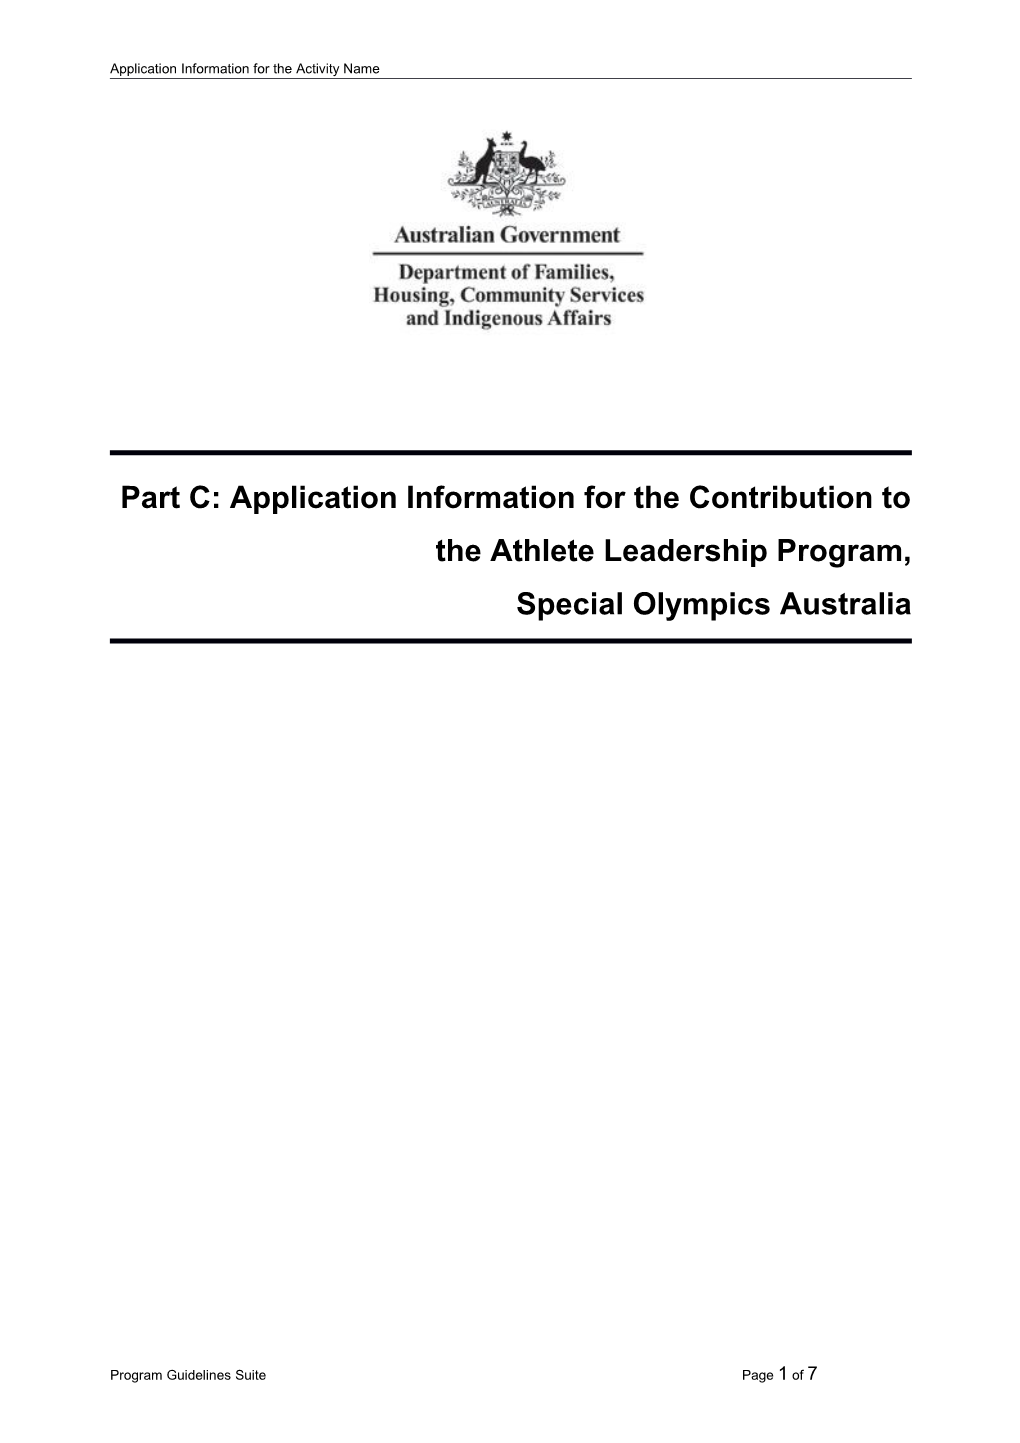 Part C: Application Information for the Contribution to the Athlete Leadership Program